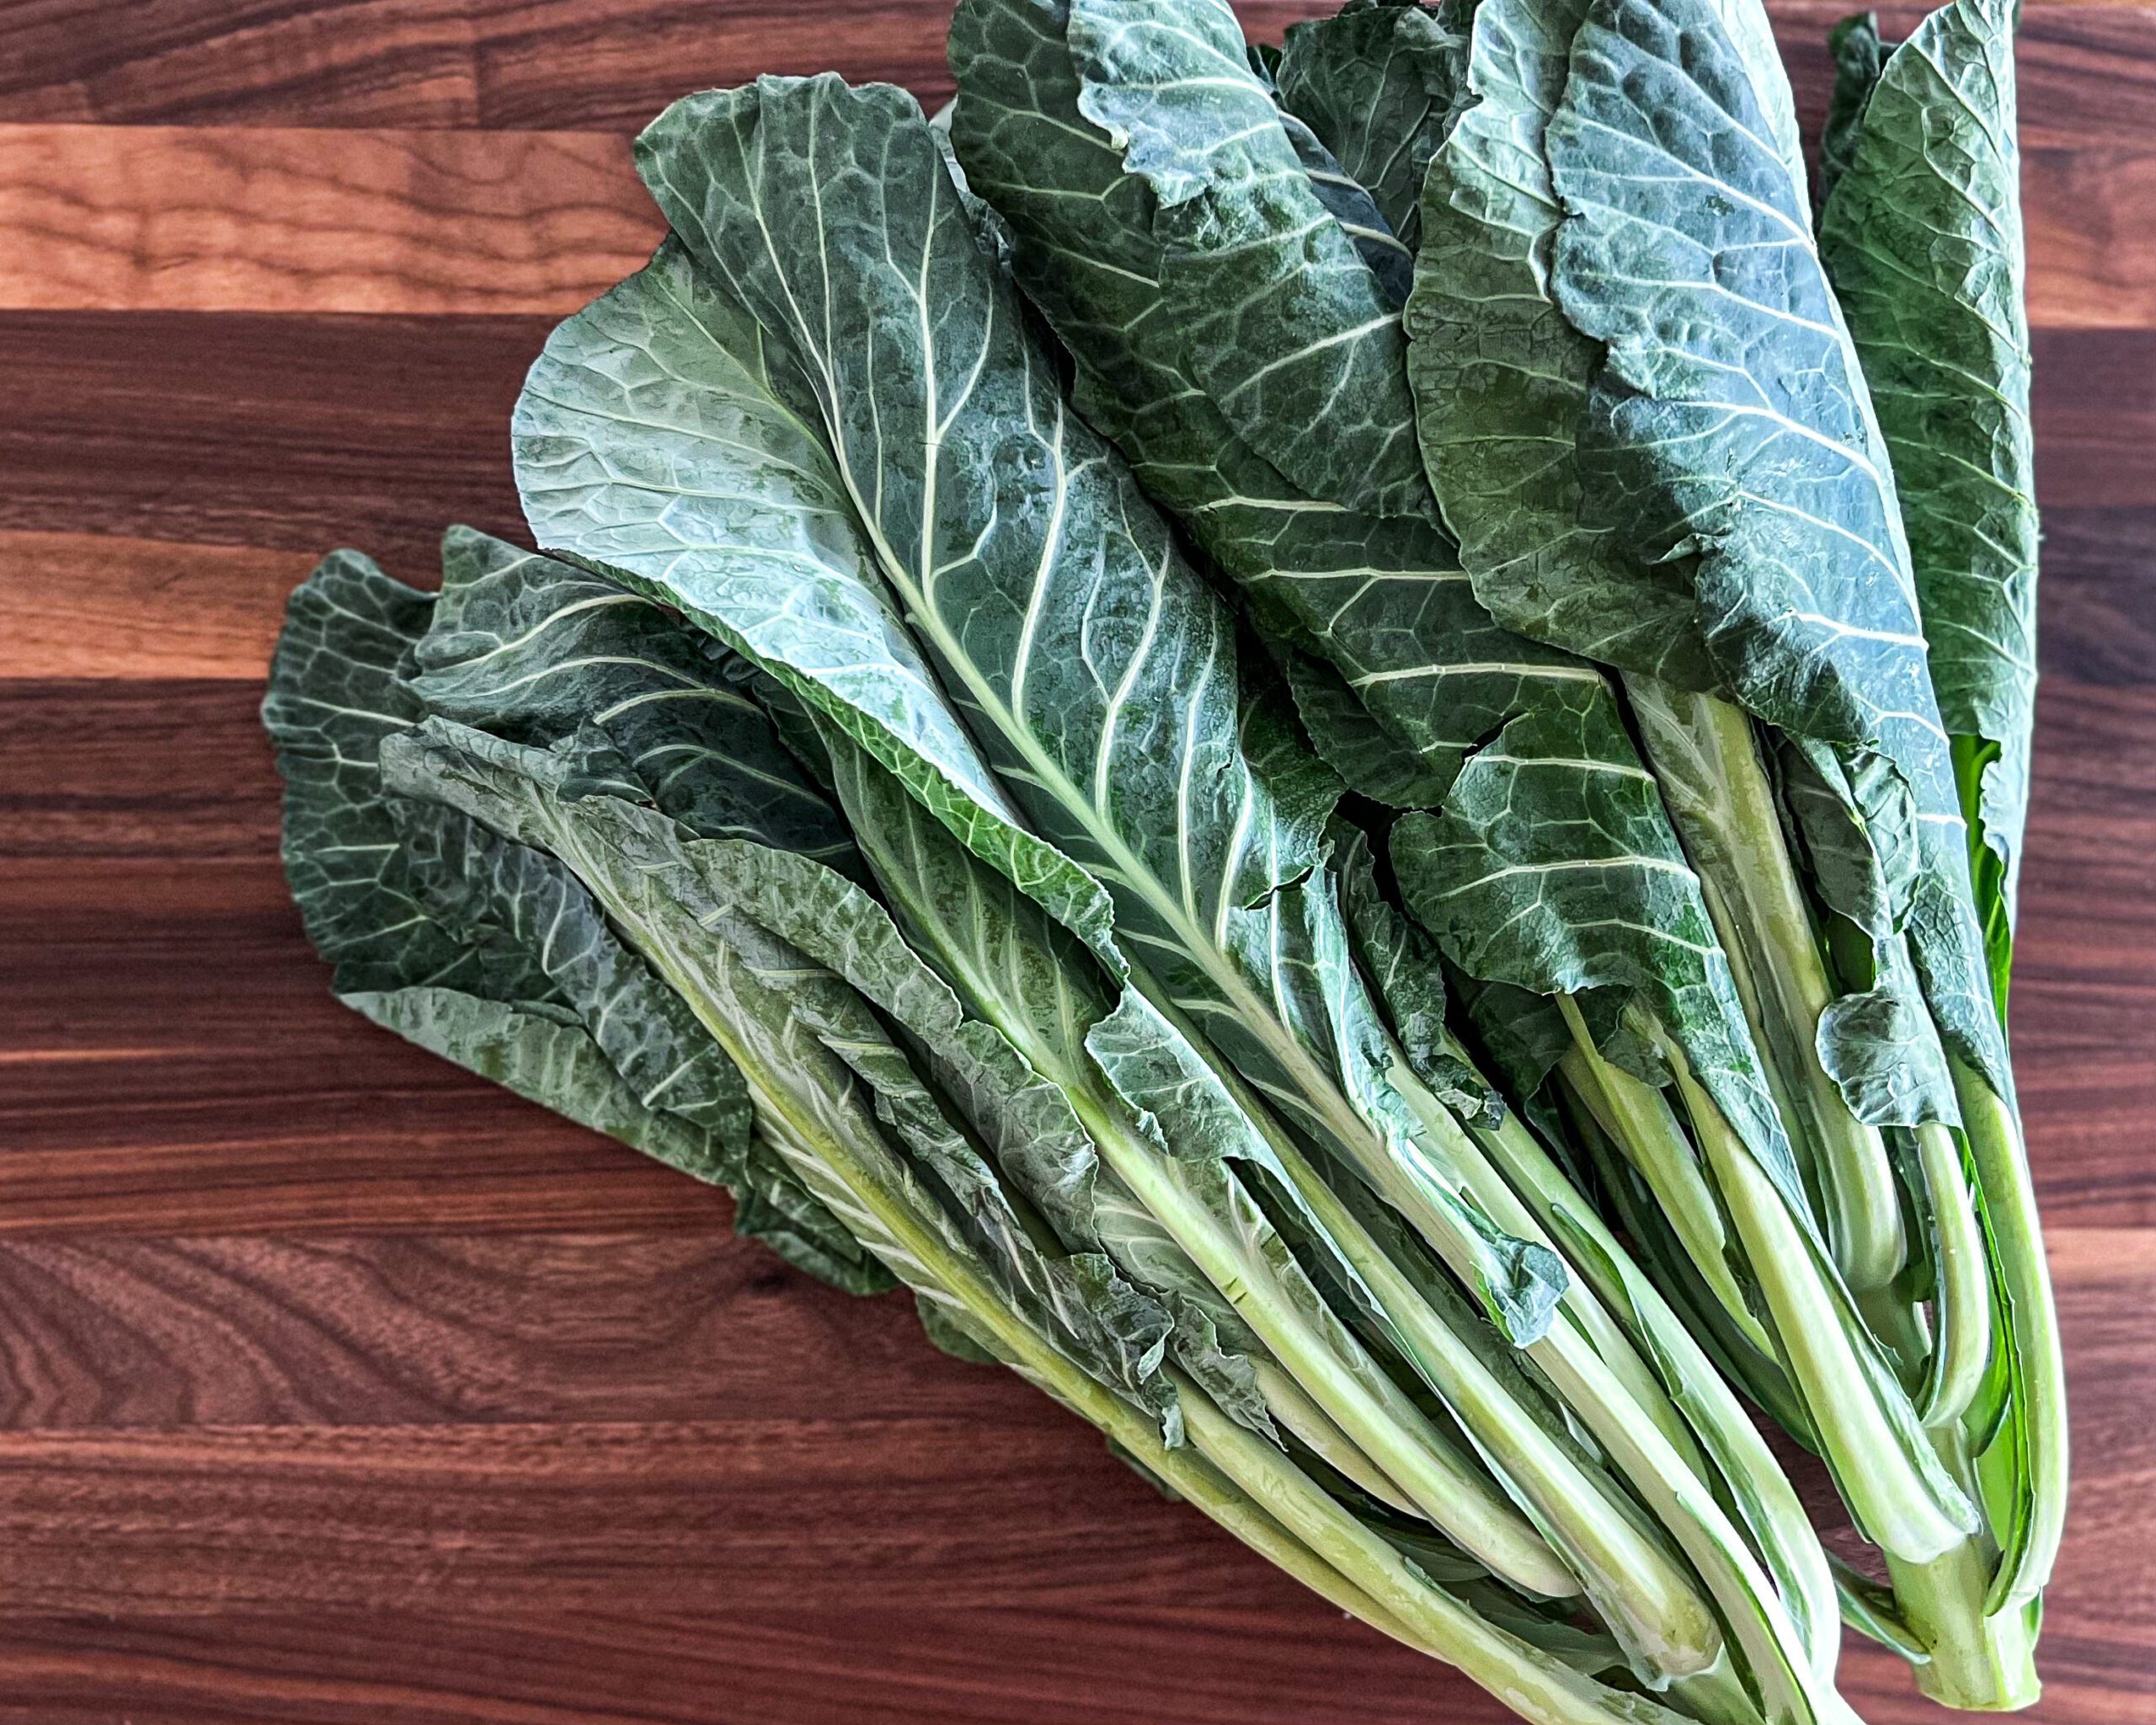 How to Prepare Raw Collard Greens for Salad Making - That Salad Lady